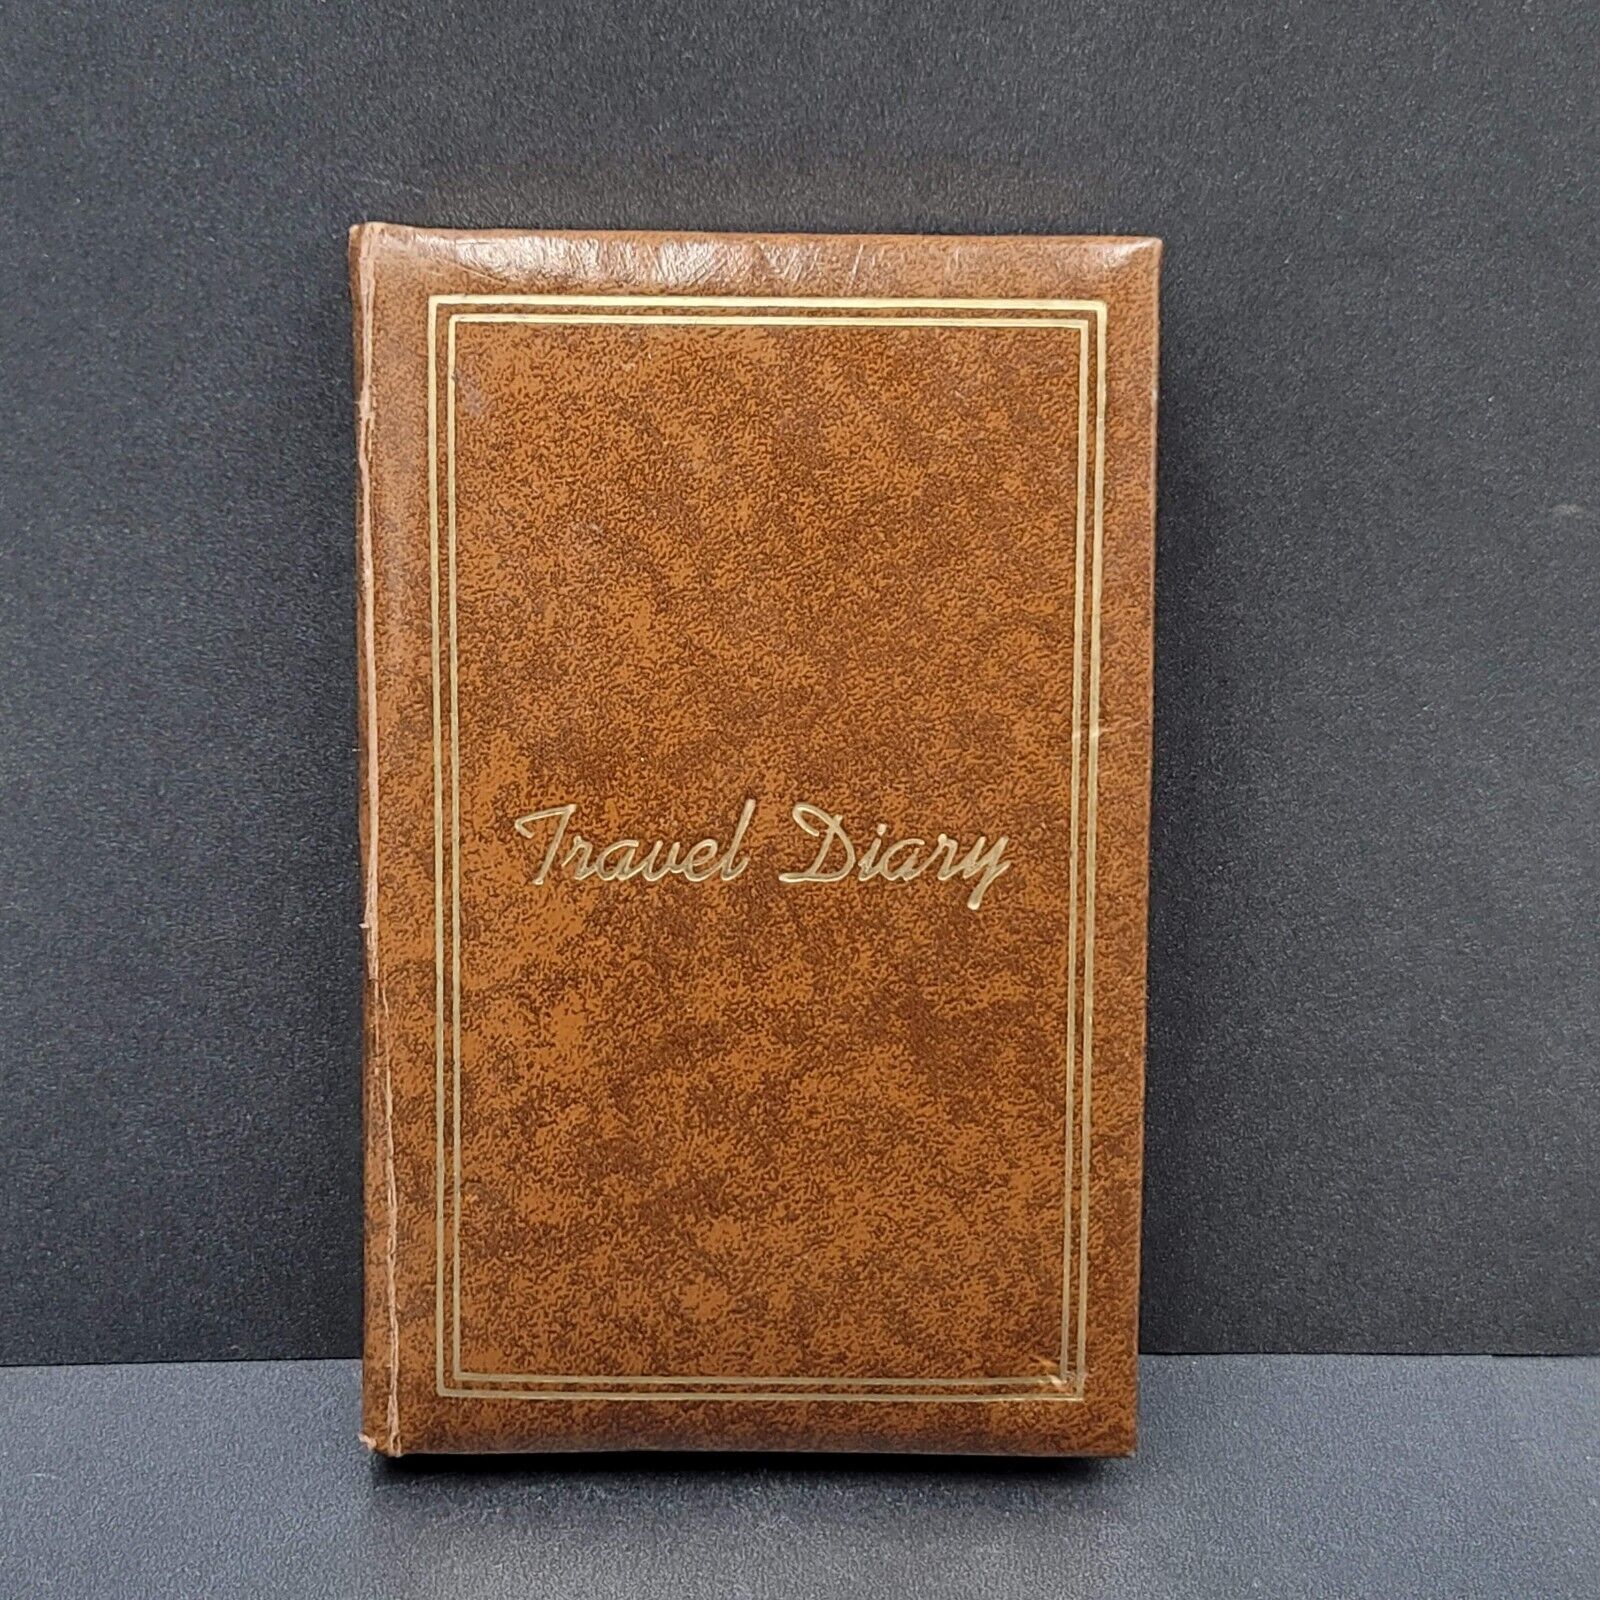 1964 Travel Diary My Trip Abroad Travel Journal